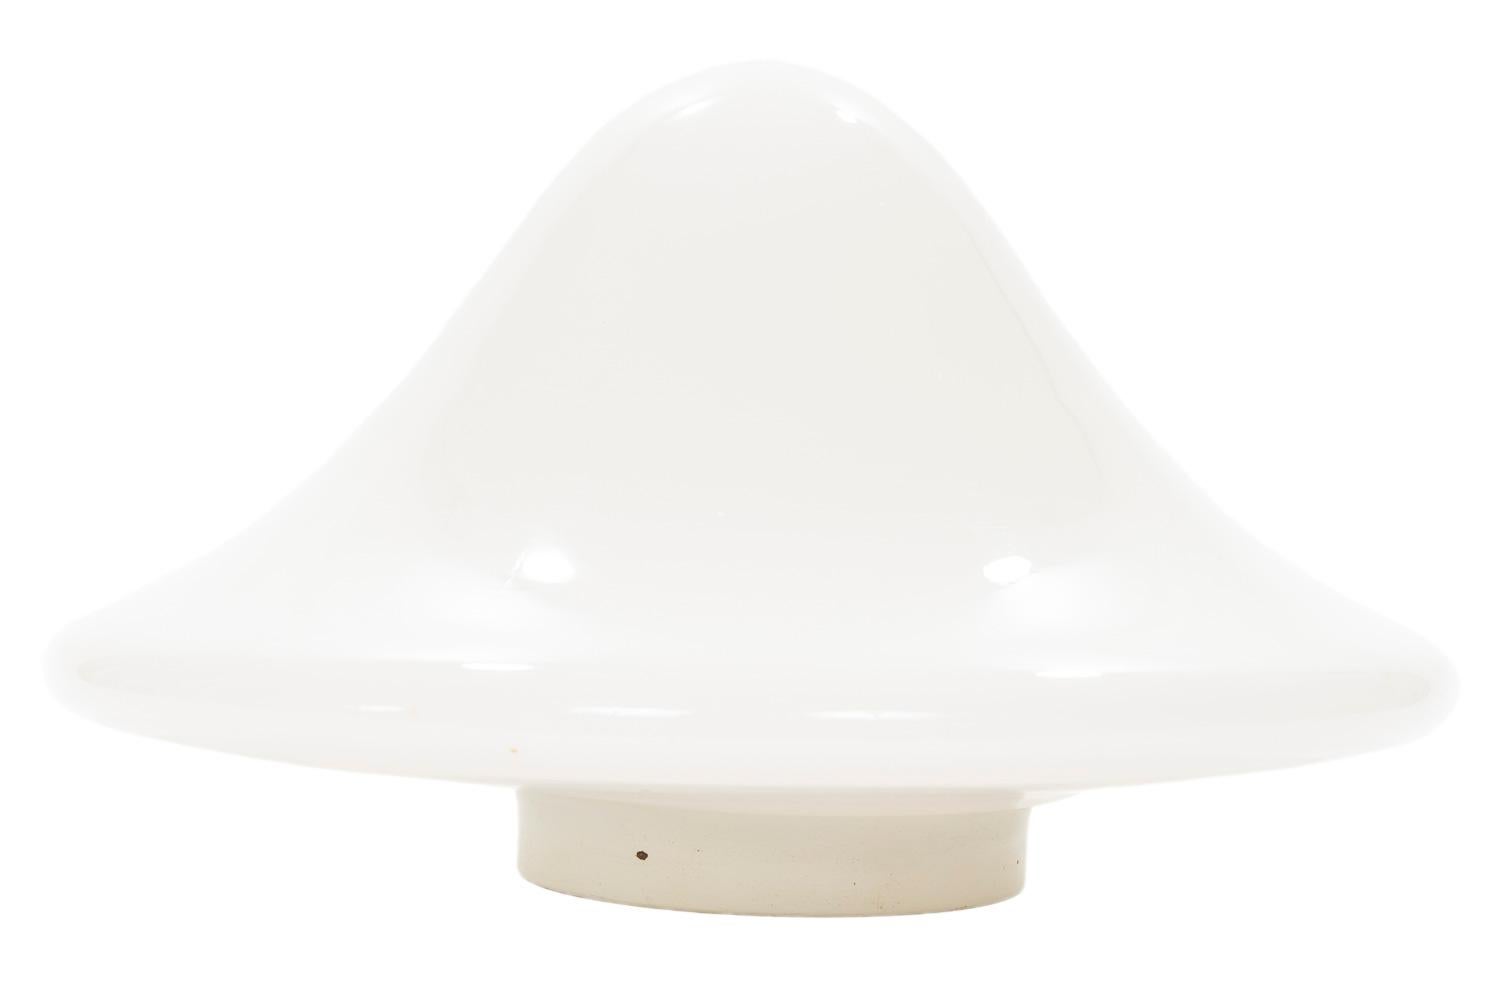 A pair of beautifully stylish vintage mushroom shaped Murano glass lamps in opaque white with a painted white metal supporting base housing a single socket. The lamps have their original labels Vetri Murano and De Majo Murano Venezia attached to the